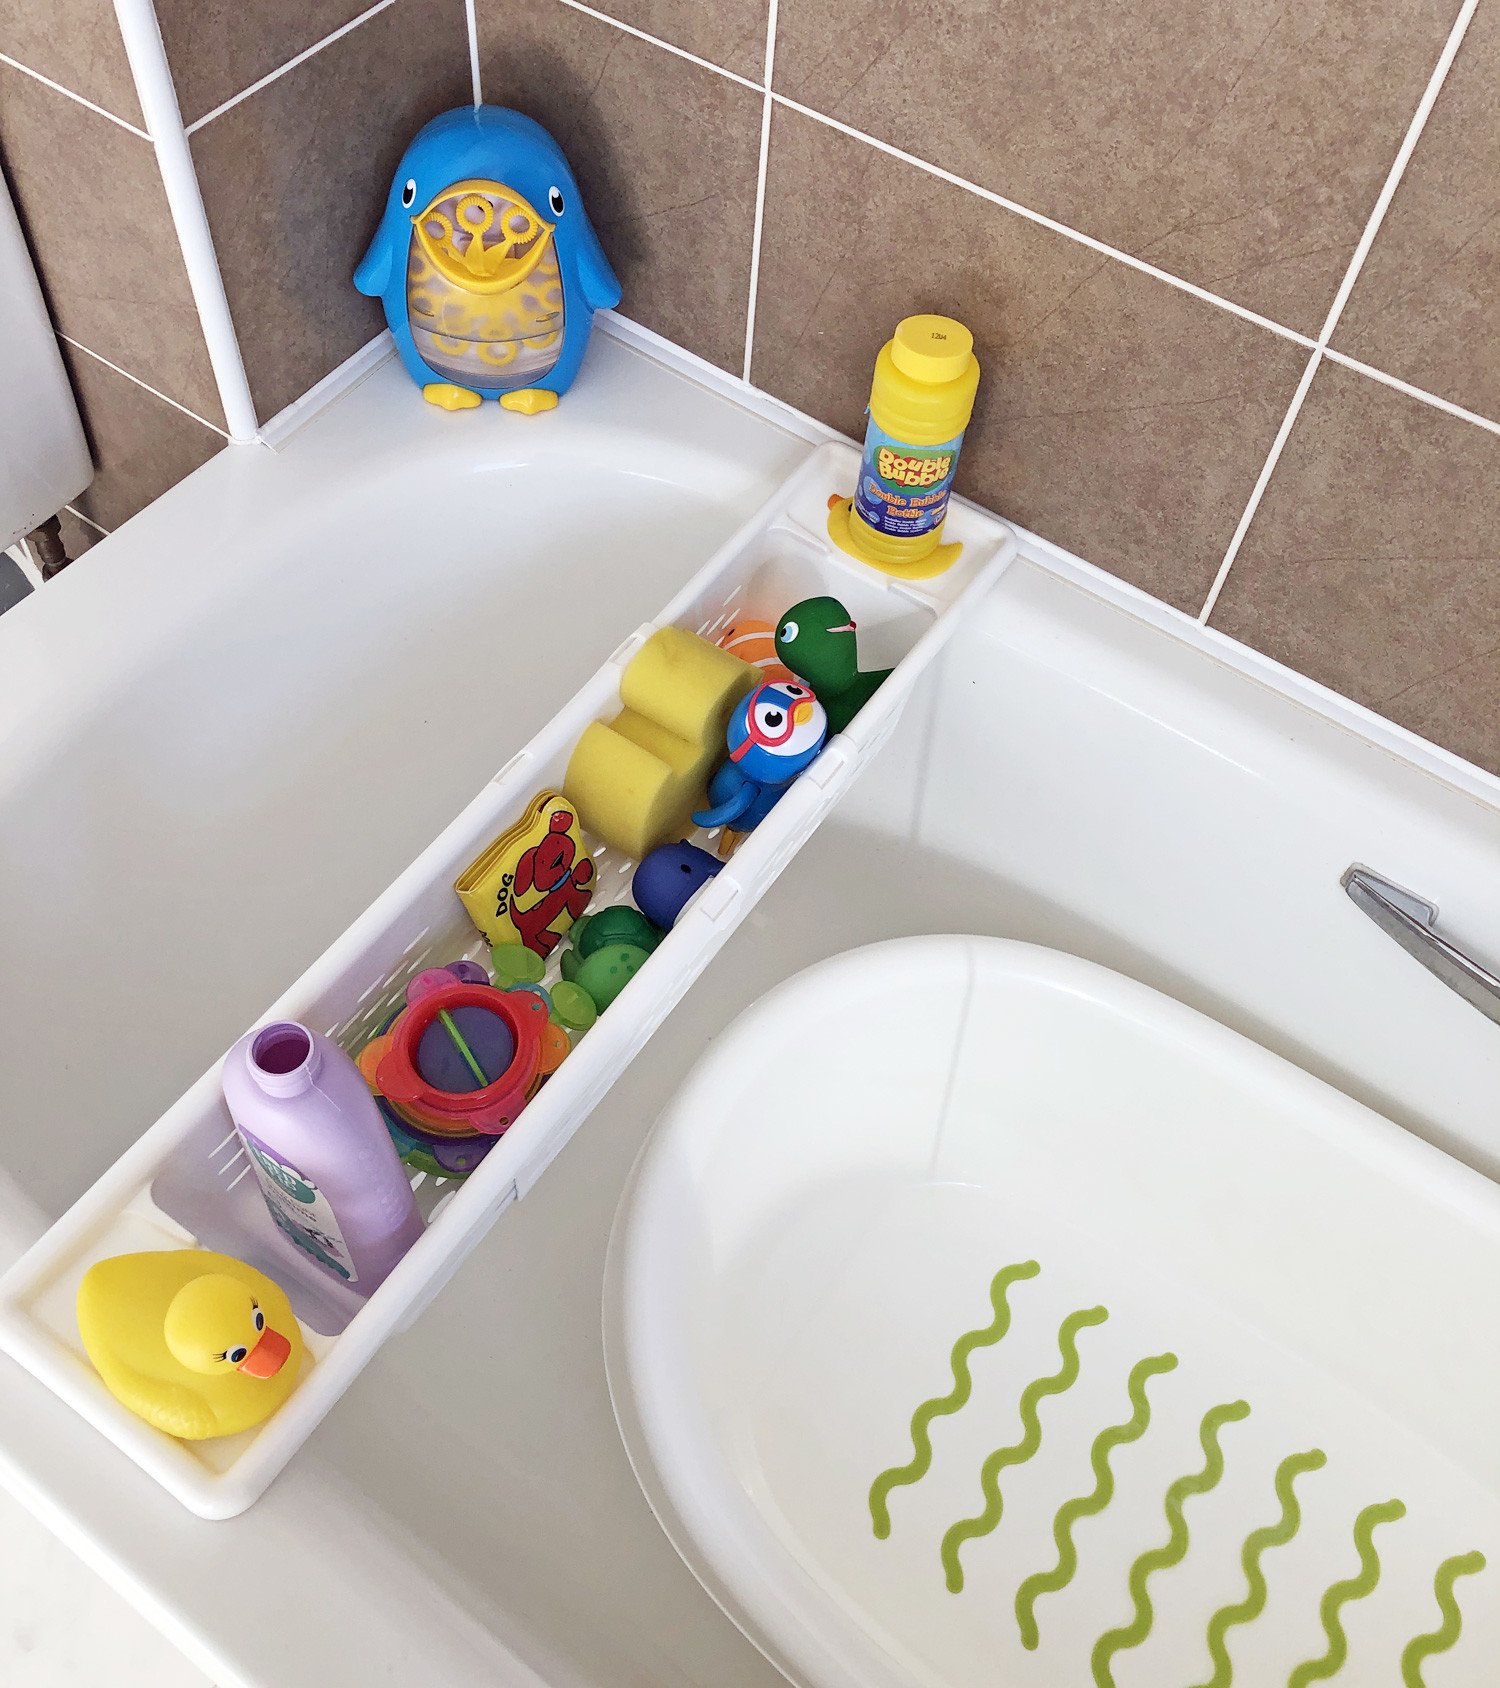 plastic bath caddy for storing toddler's toys